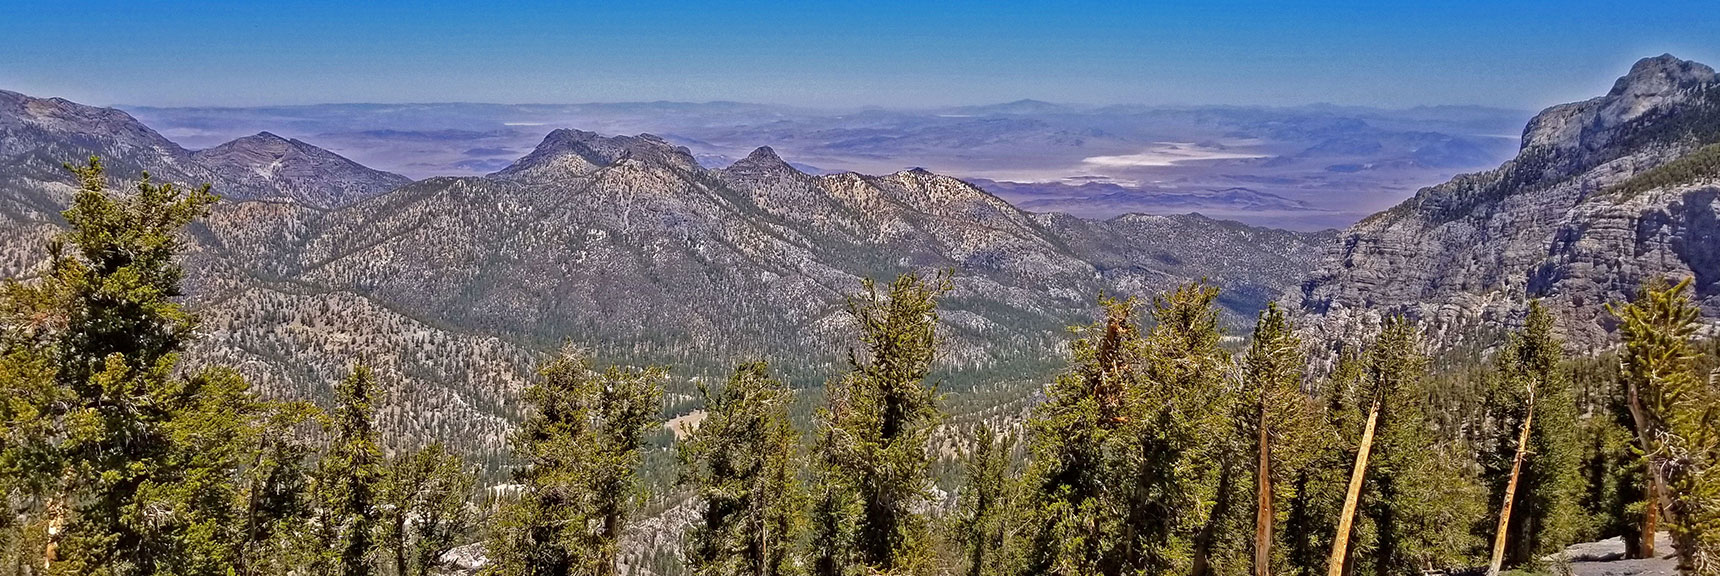 | Lee to Kyle Canyon | Foxtail Approach | Mt Charleston Wilderness | Spring Mountains, Nevada